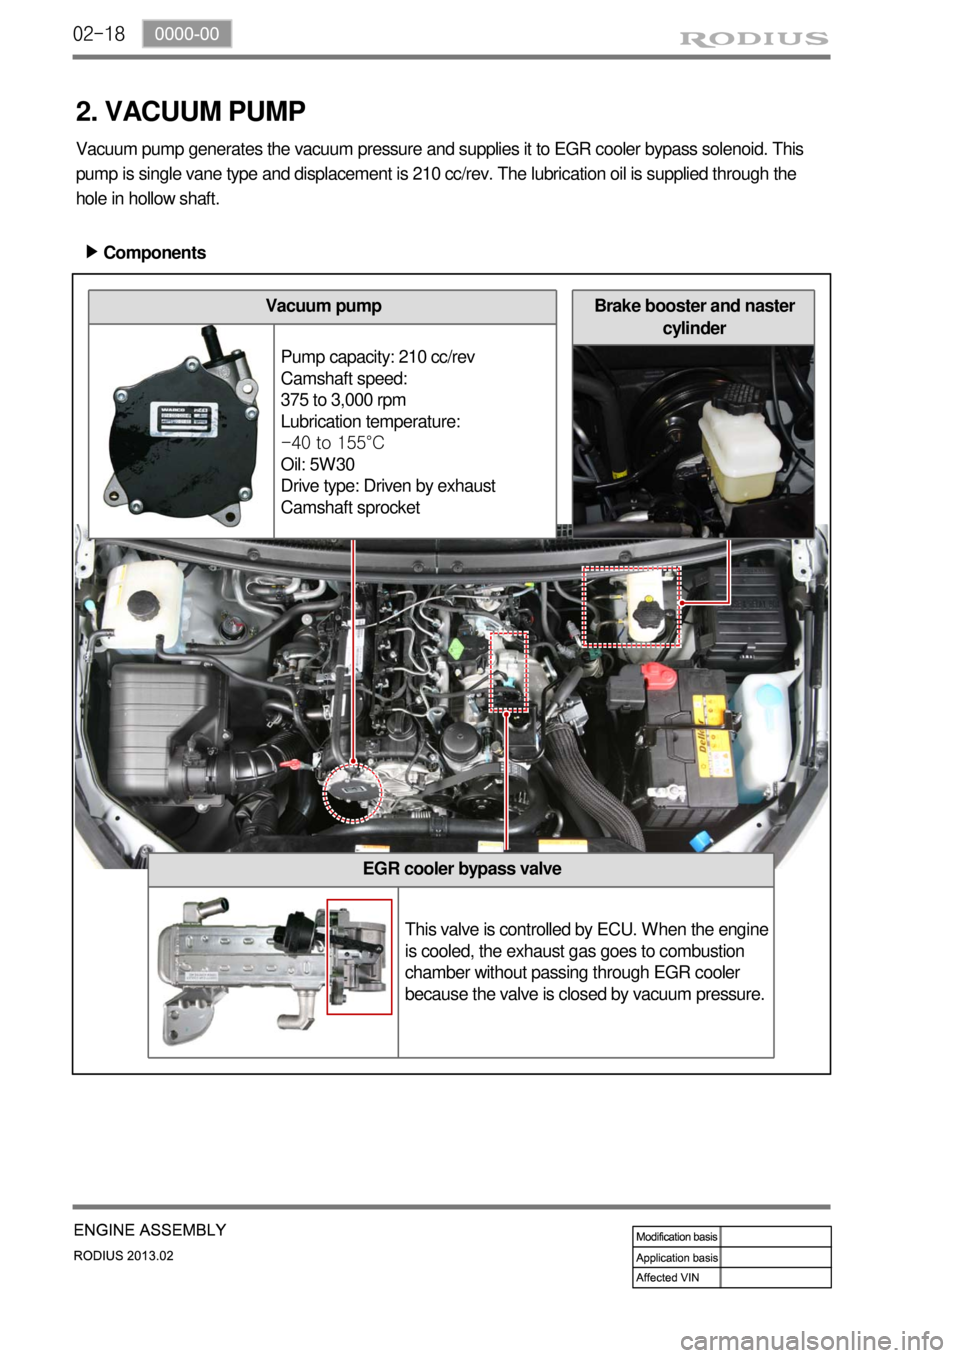 SSANGYONG TURISMO 2013  Service Manual 02-18
Vacuum pump
Pump capacity: 210 cc/rev
Camshaft speed: 
375 to 3,000 rpm
Lubrication temperature: 
-40 to 155°C
Oil: 5W30
Drive type: Driven by exhaust 
Camshaft sprocket
EGR cooler bypass valve